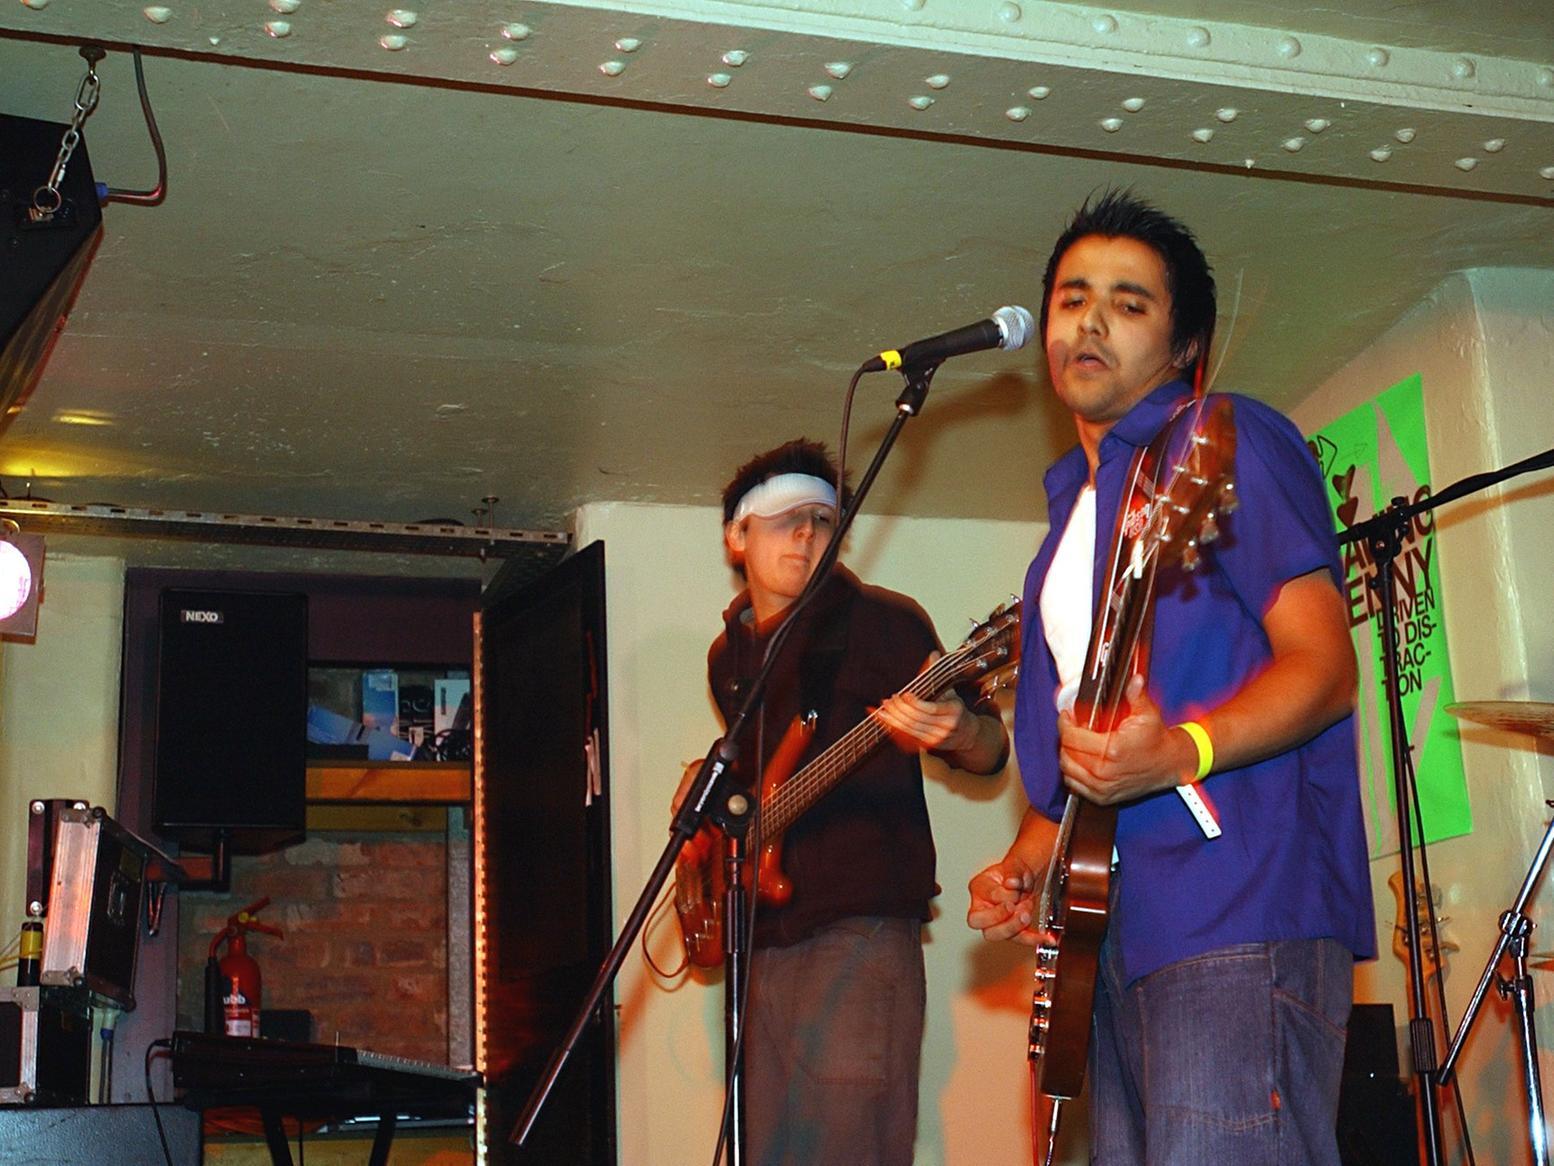 Haroon Rashid (right) from Pudsey, the lead singer of Fineapple, on stage in 2004.